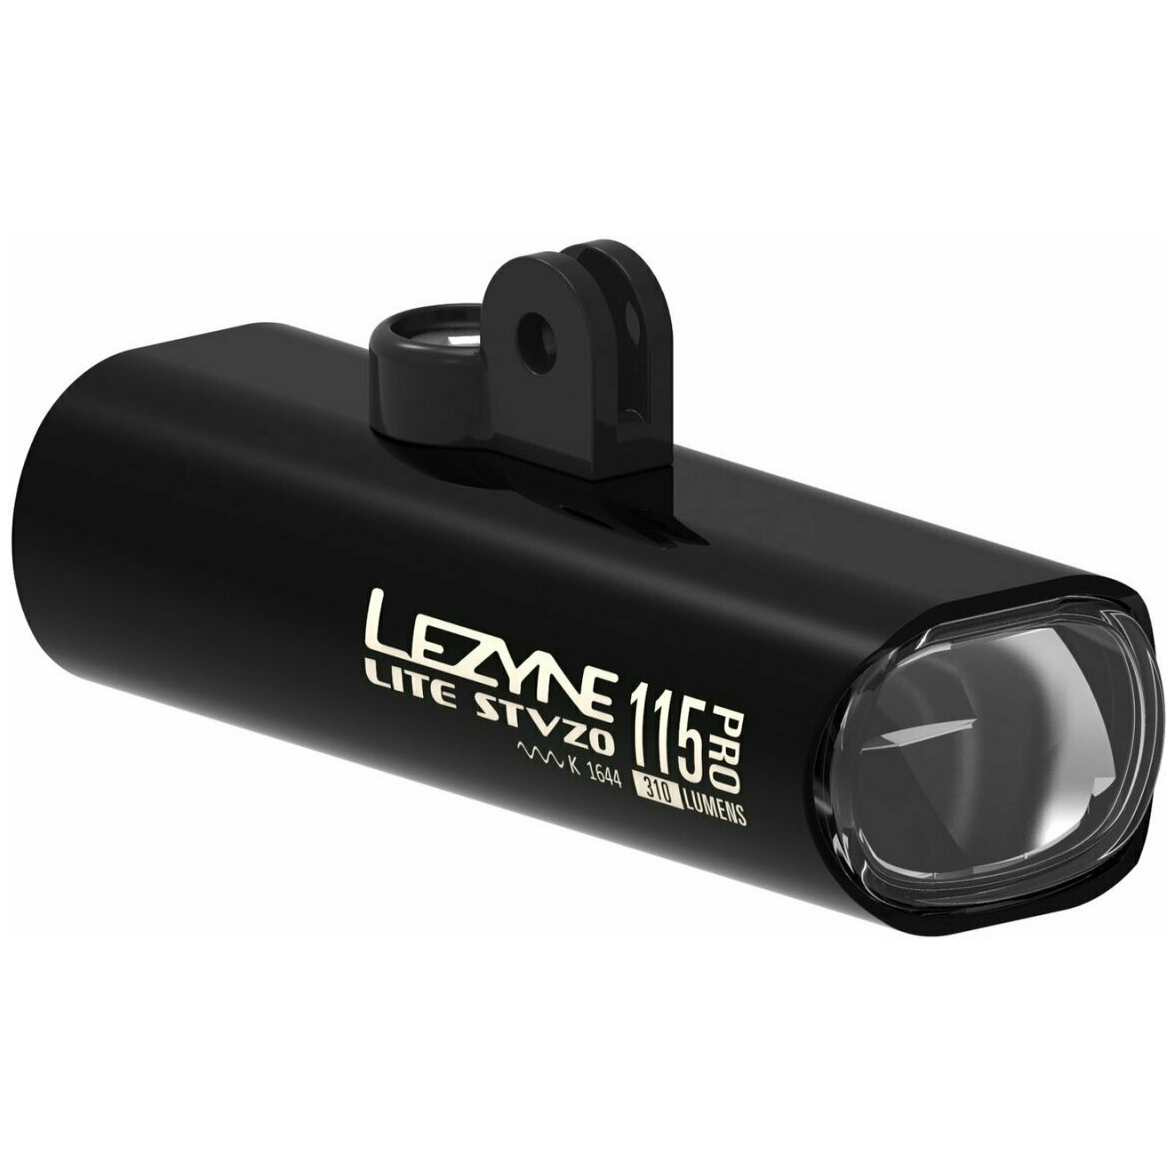 Picture of Lezyne Lite Drive Pro 115 Reverse Front Light - German StVZO approved - black